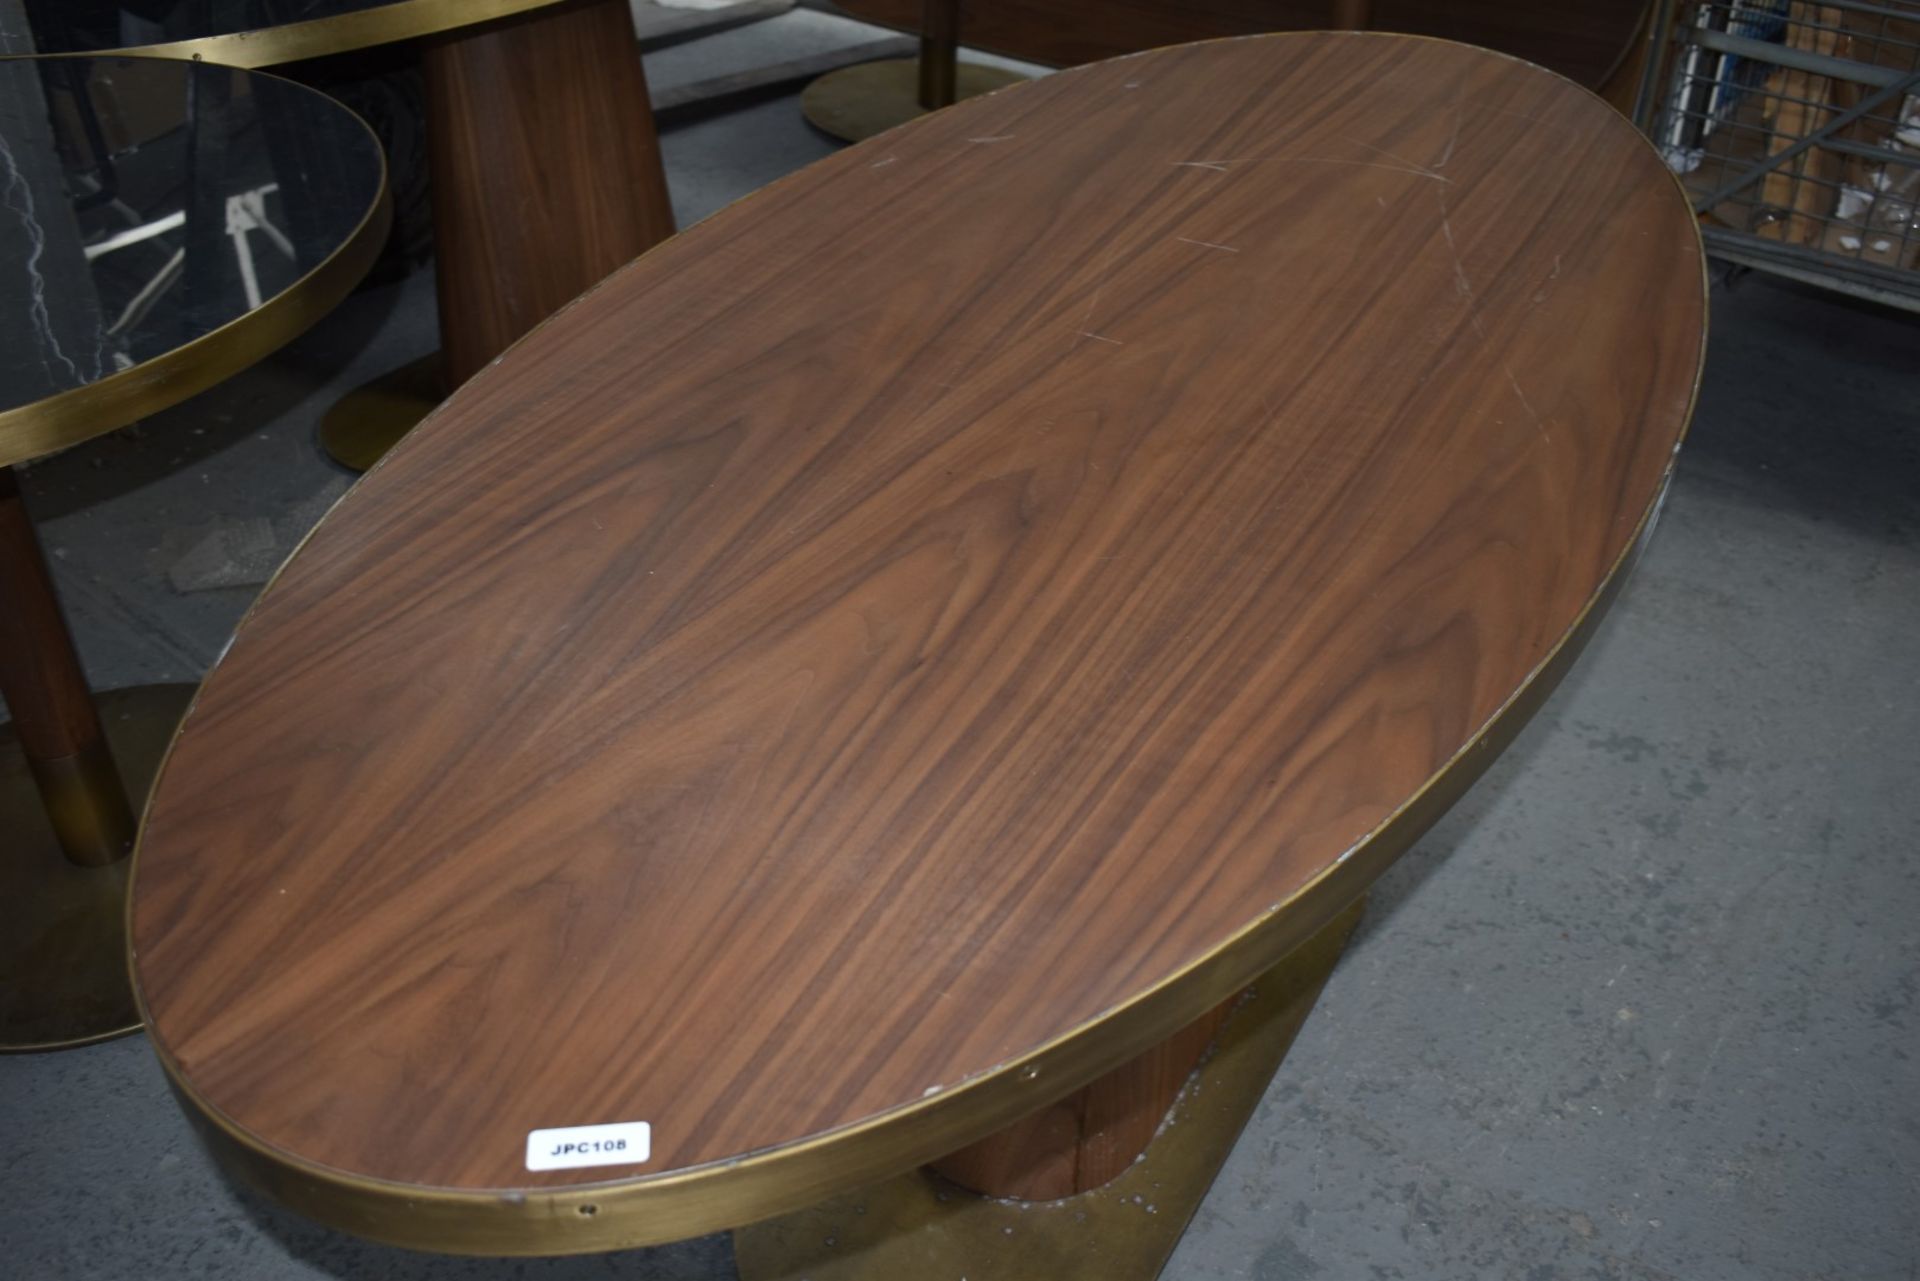 1 x Oval Banqueting Dining Table By AKP Design Athens - Walnut Top With Antique Brass Edging - Image 5 of 7